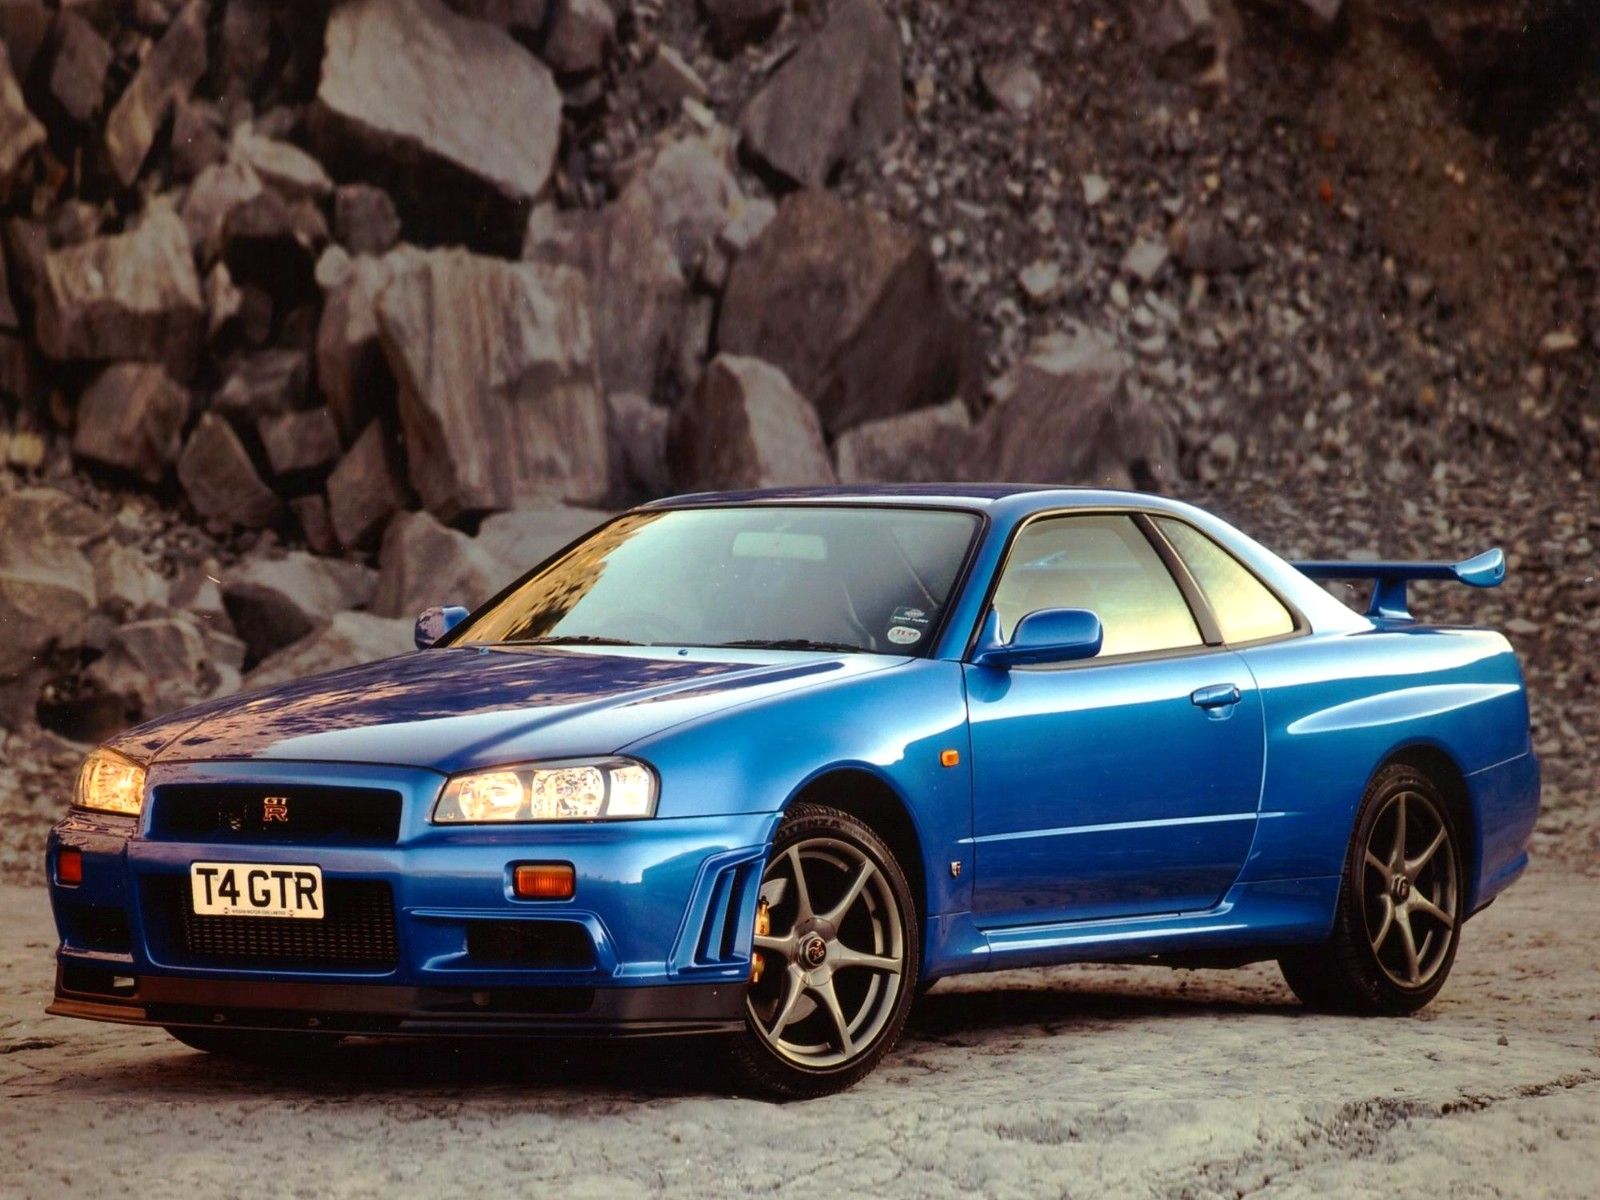 Nissan Skyline R34 GT-R (Blue) - Front Right